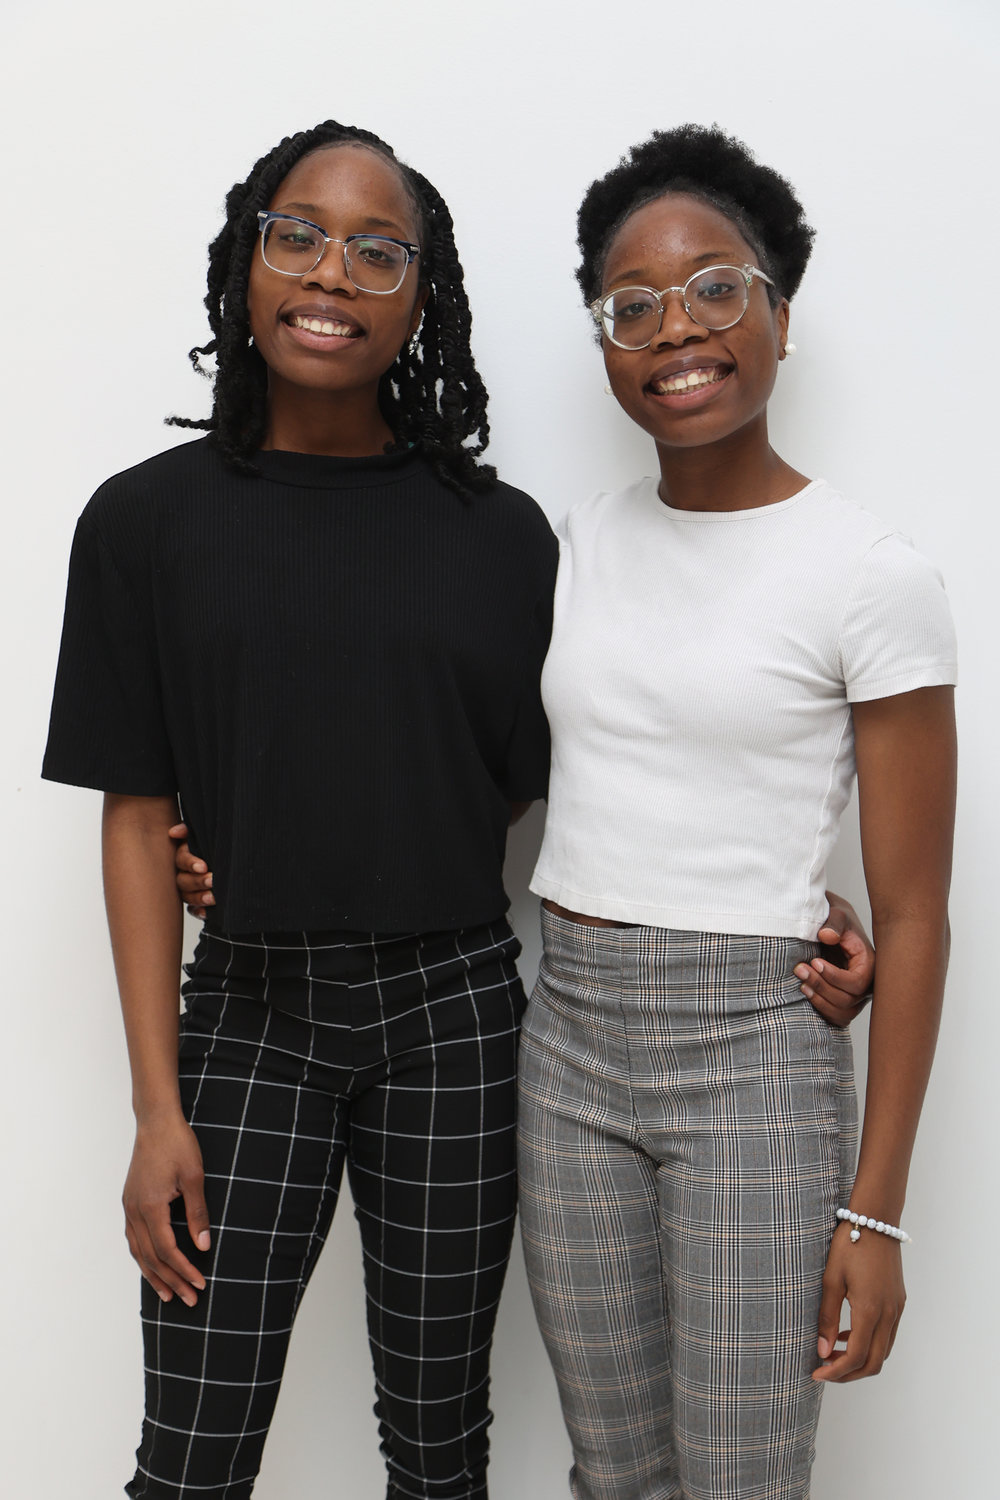 Twin sisters Gloria and Victoria Guerrier, West Hempstead High School's Valedictorian and Salutatorian of this year's graduating class.